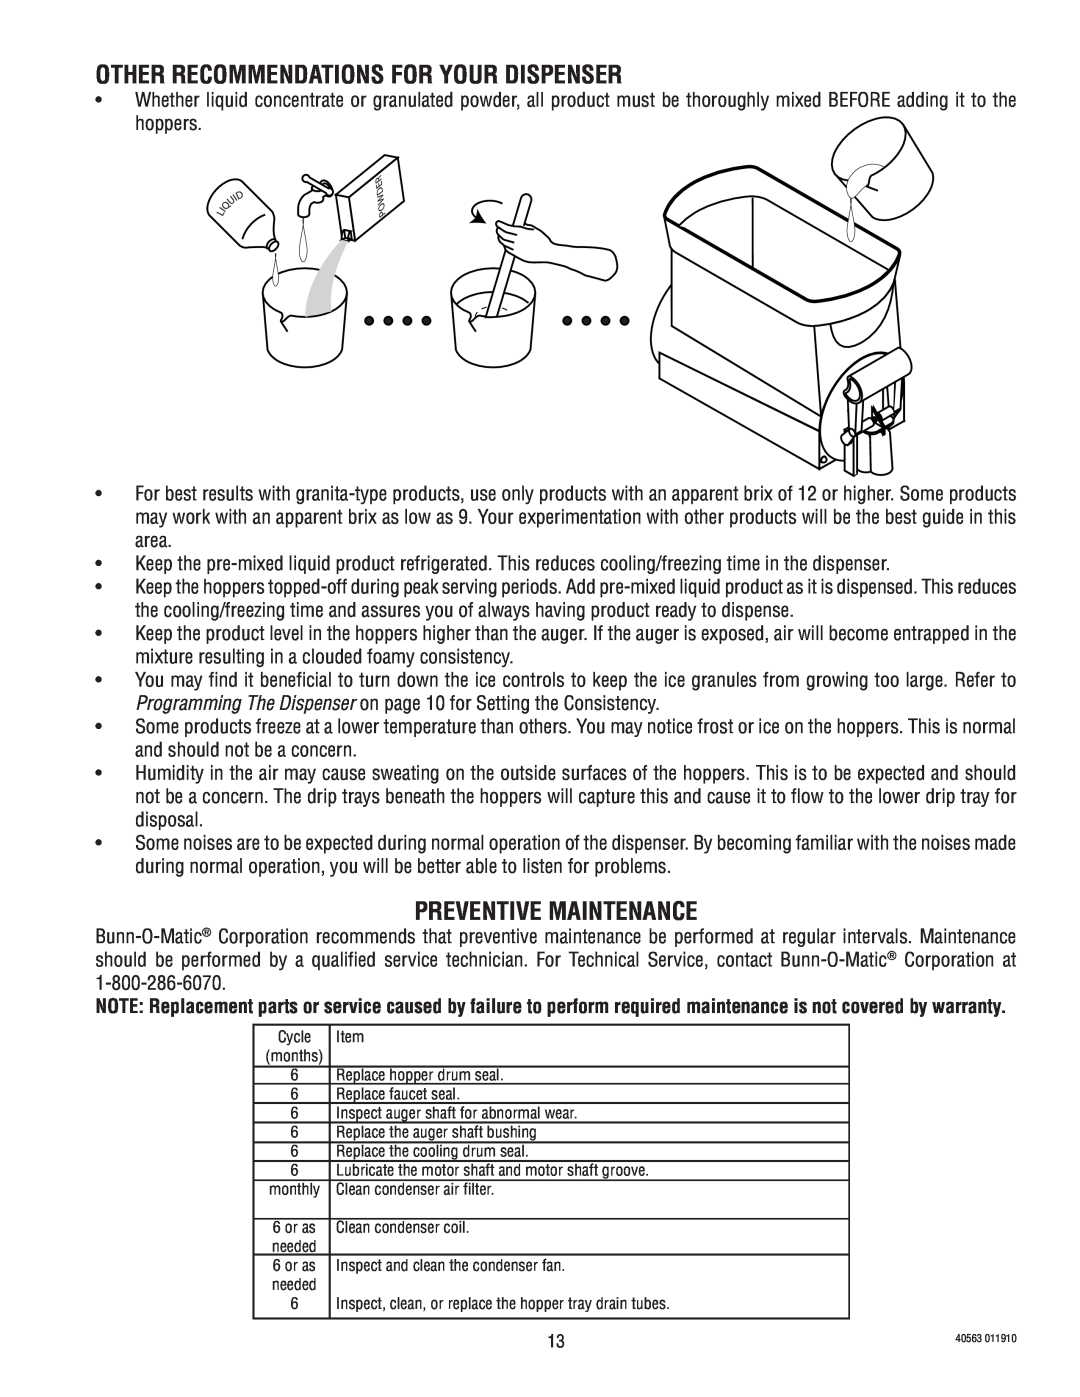 Bunn ULTRA-1 service manual Other Recommendations For Your Dispenser, Preventive Maintenance 